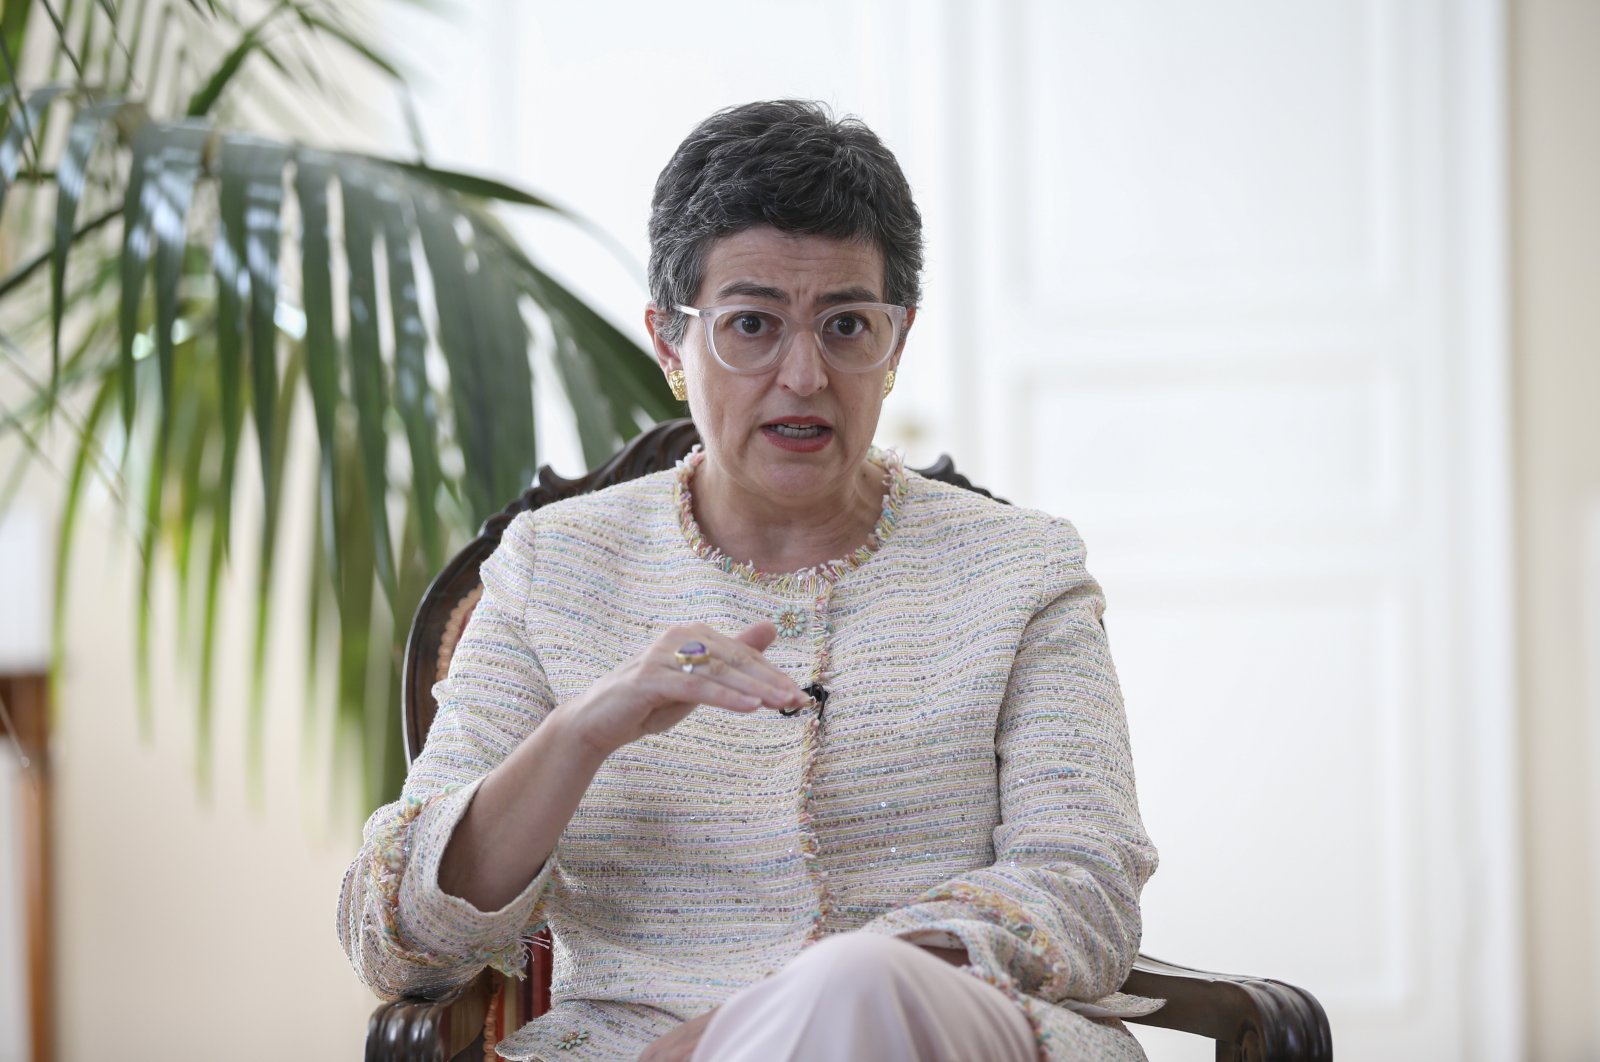 Spain's Minister of Foreign Affairs, European Union and Cooperation Arancha Gonzalez Laya speaks to Anadolu Agency on Turkey-Spain relations and regional issues during a visit to Ankara, Turkey, July 27, 2020. (AA Photo)